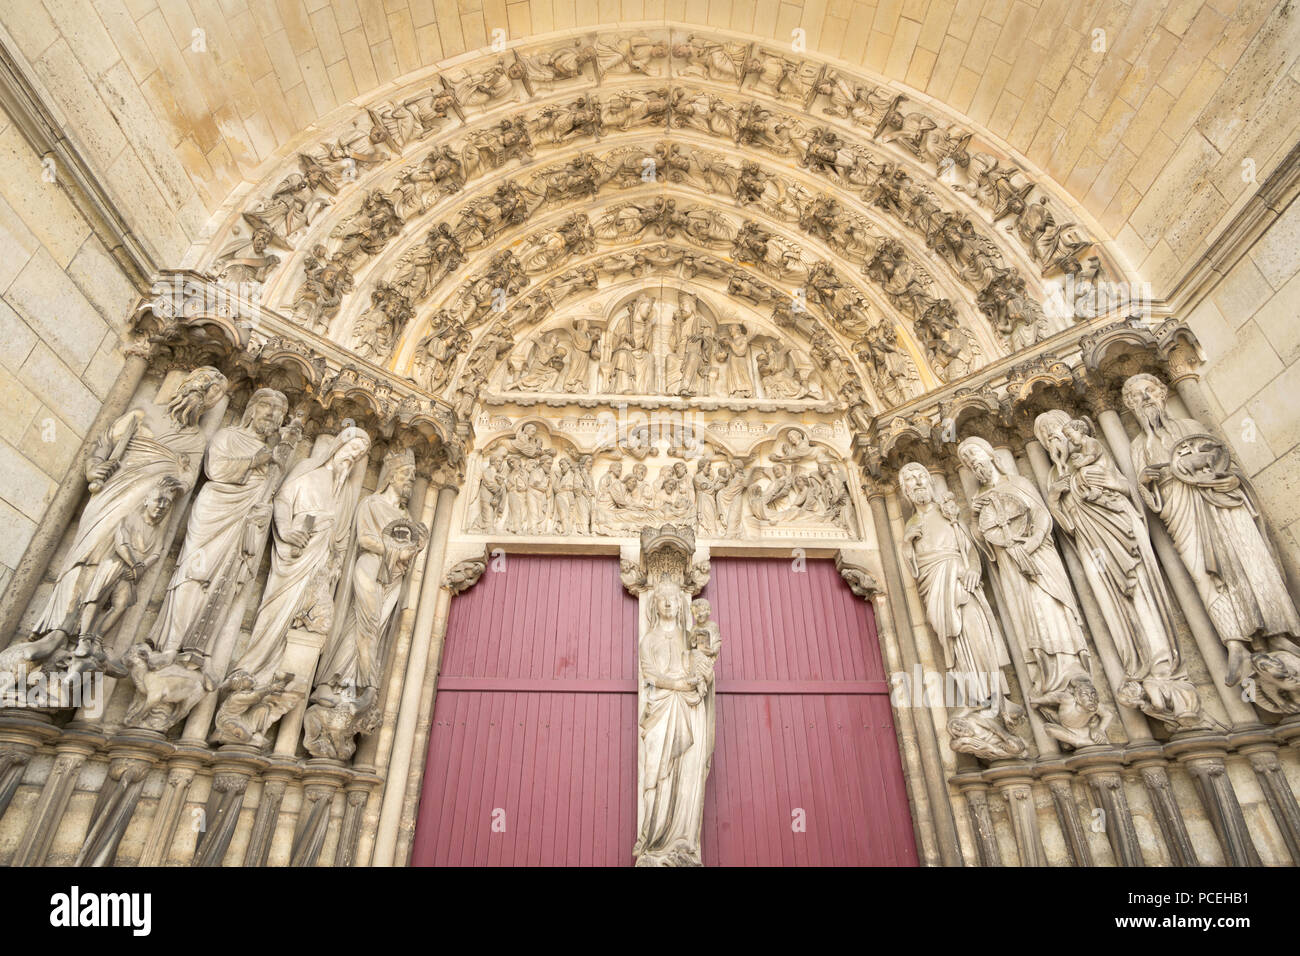 The central portal of the west facade of Laon cathedral, France, Europe Stock Photo